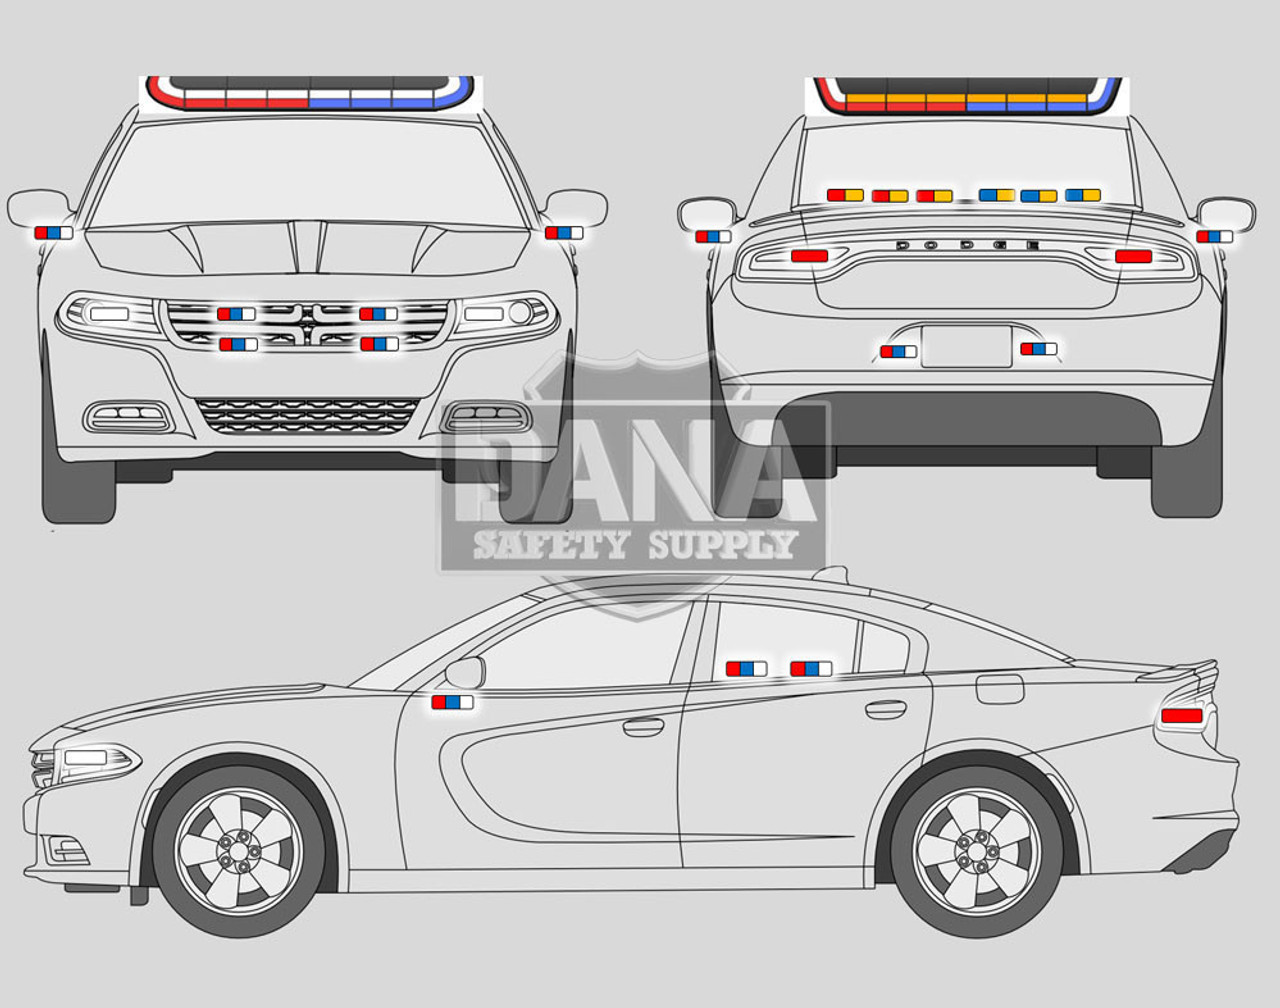 New 2023 Silver Dodge Charger PPV V8 RWD ready to be built as a Marked Patrol Package Police Pursuit Car (Emergency Lighting, Siren, Controller, Partition, Window Bars, etc.), + Delivery, S2